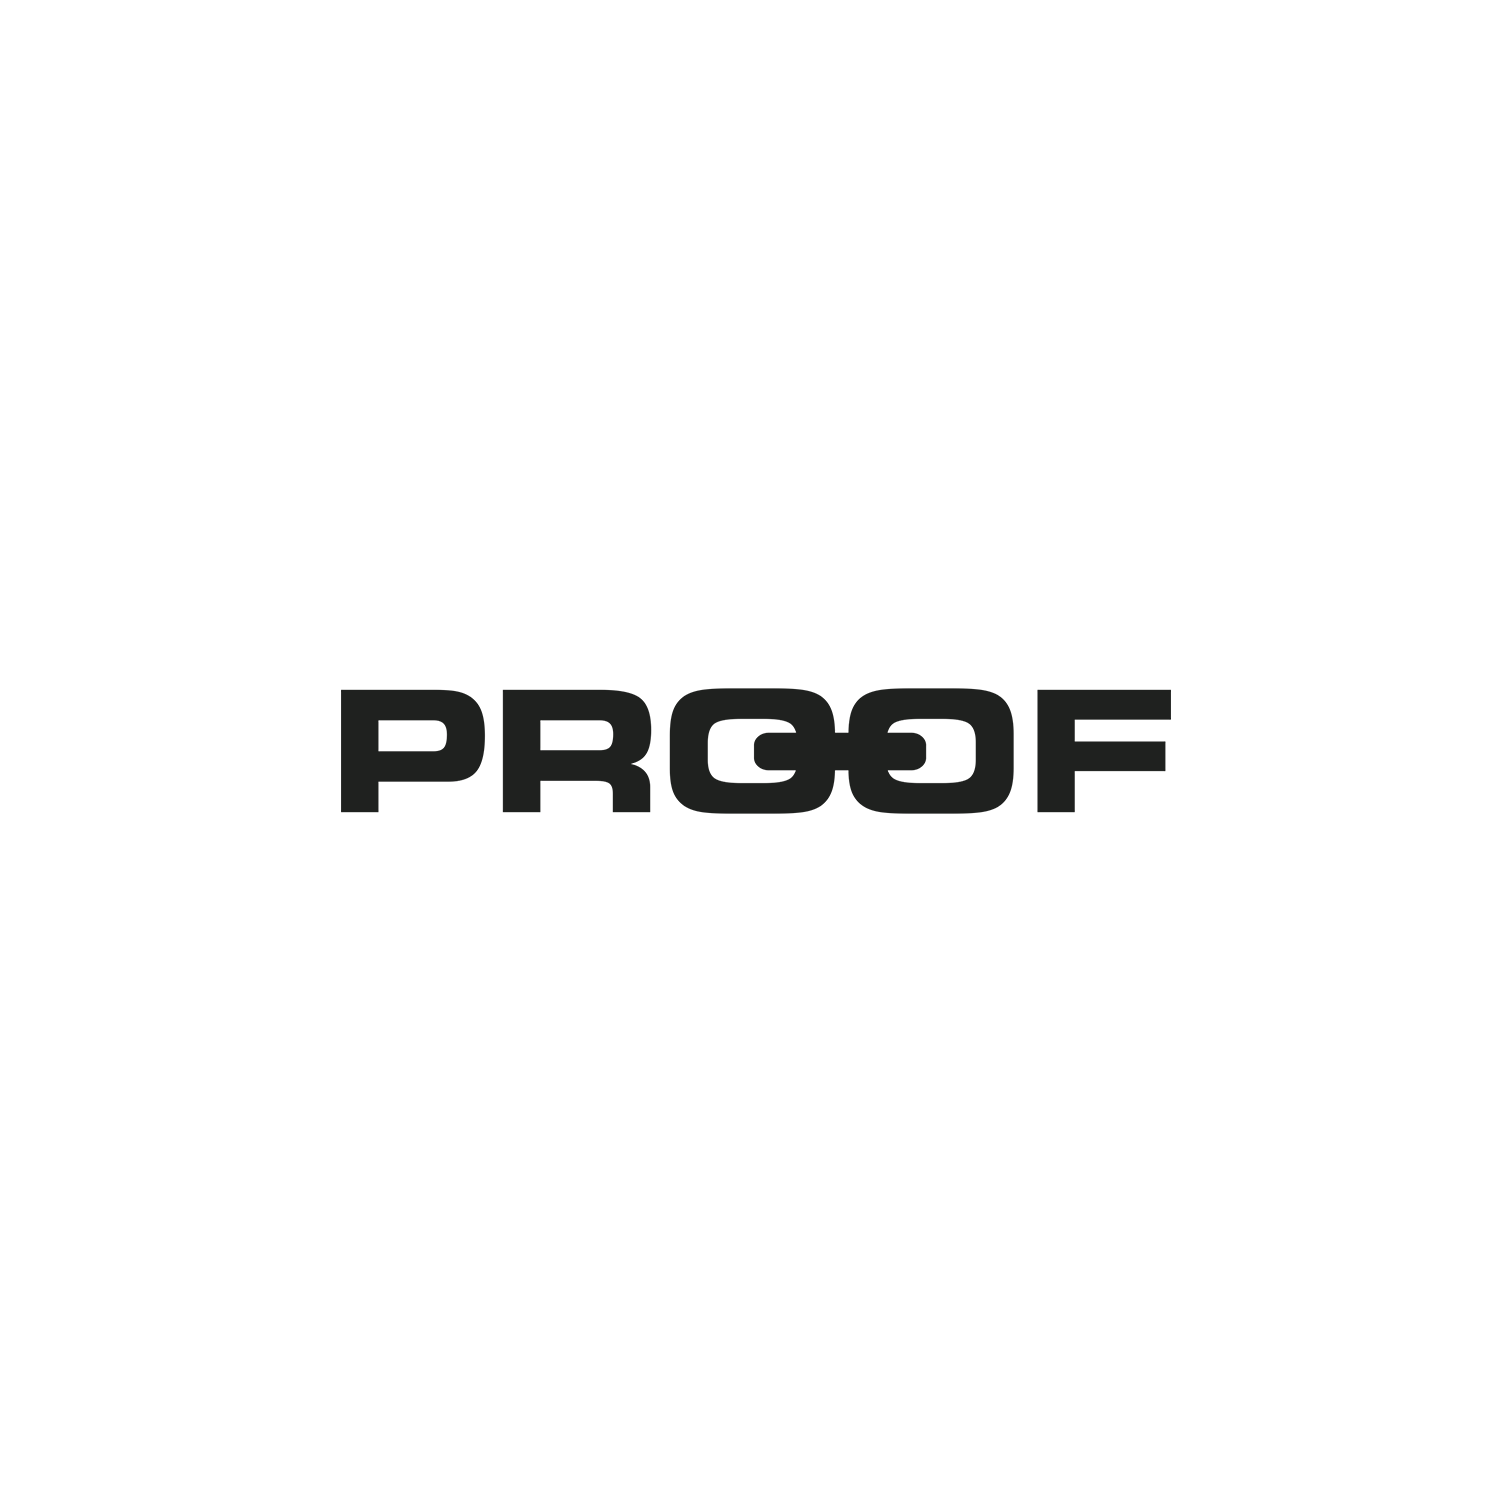 Proof Logo - Proof Png (94+ images in Collection) Page 1